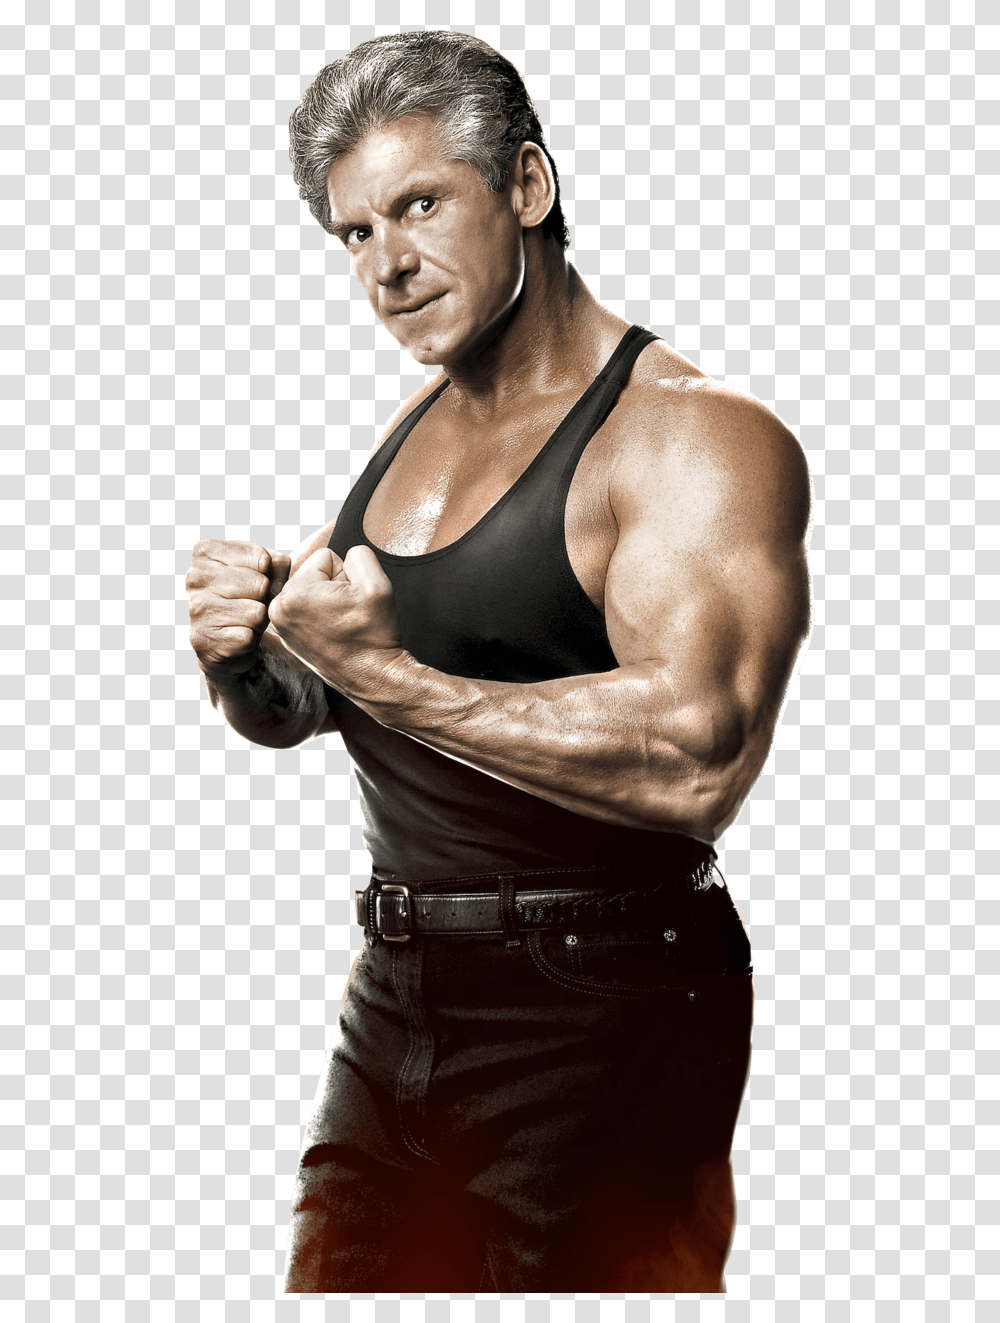 Wwe 2k14 Vince Mcmahon Render Cutout By Thexrealxbanks Wwe Vince Mcmahon, Person, Human, Arm, Sport Transparent Png